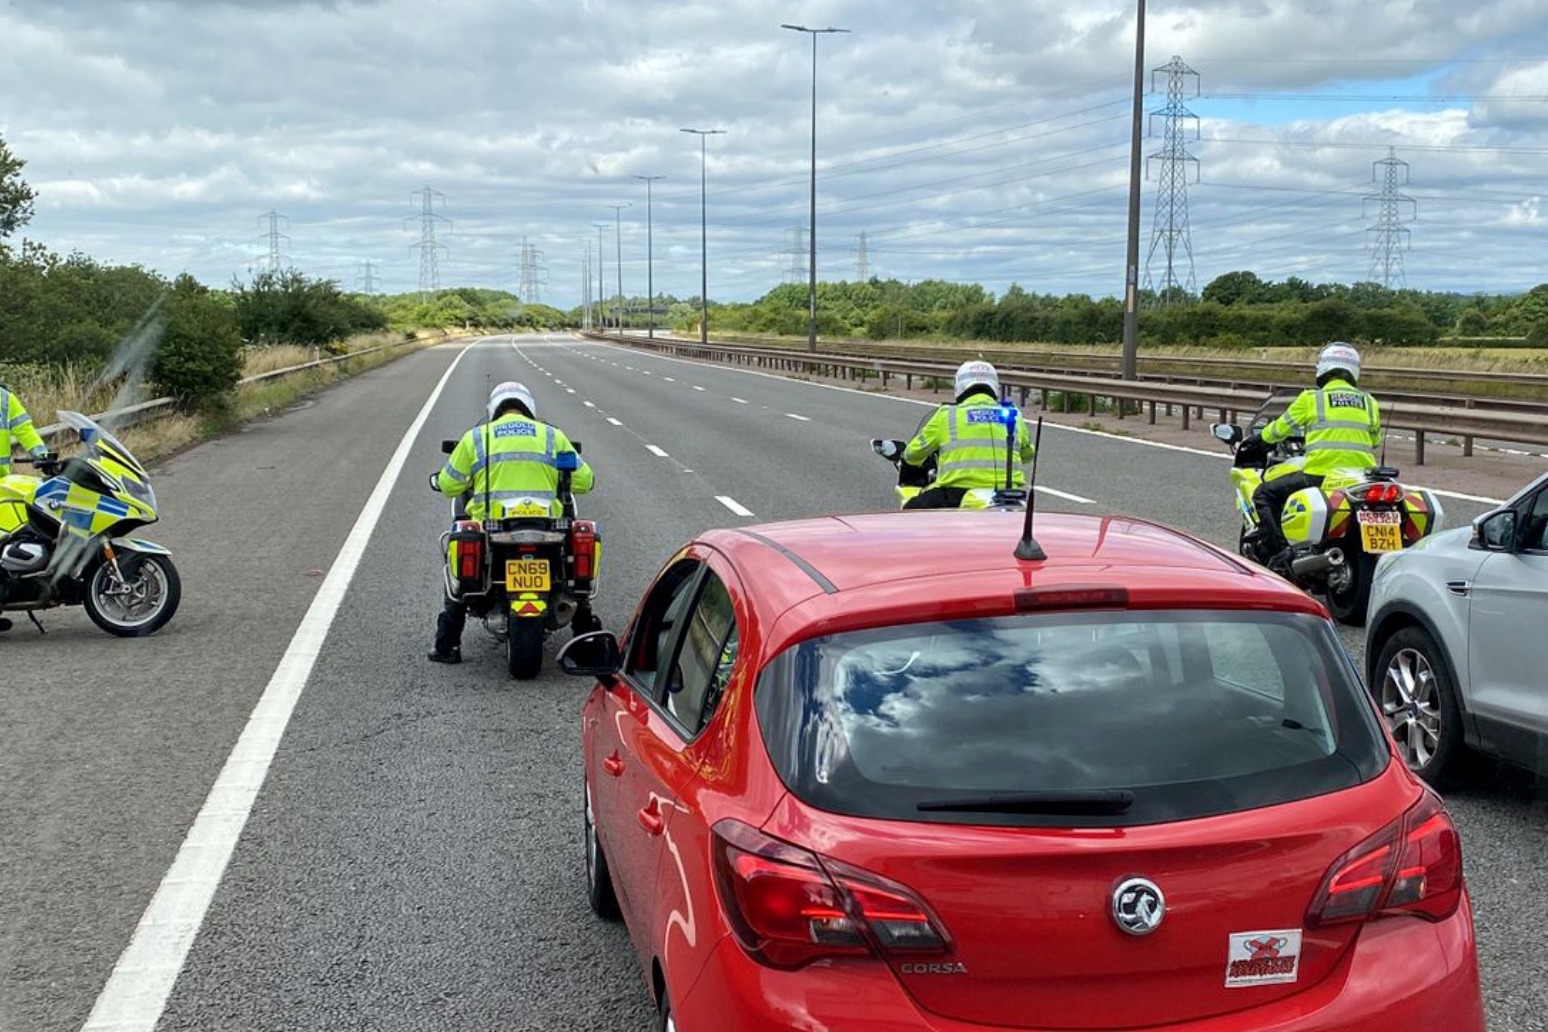 Twelve arrested during M4 fuel price protest for driving too slow